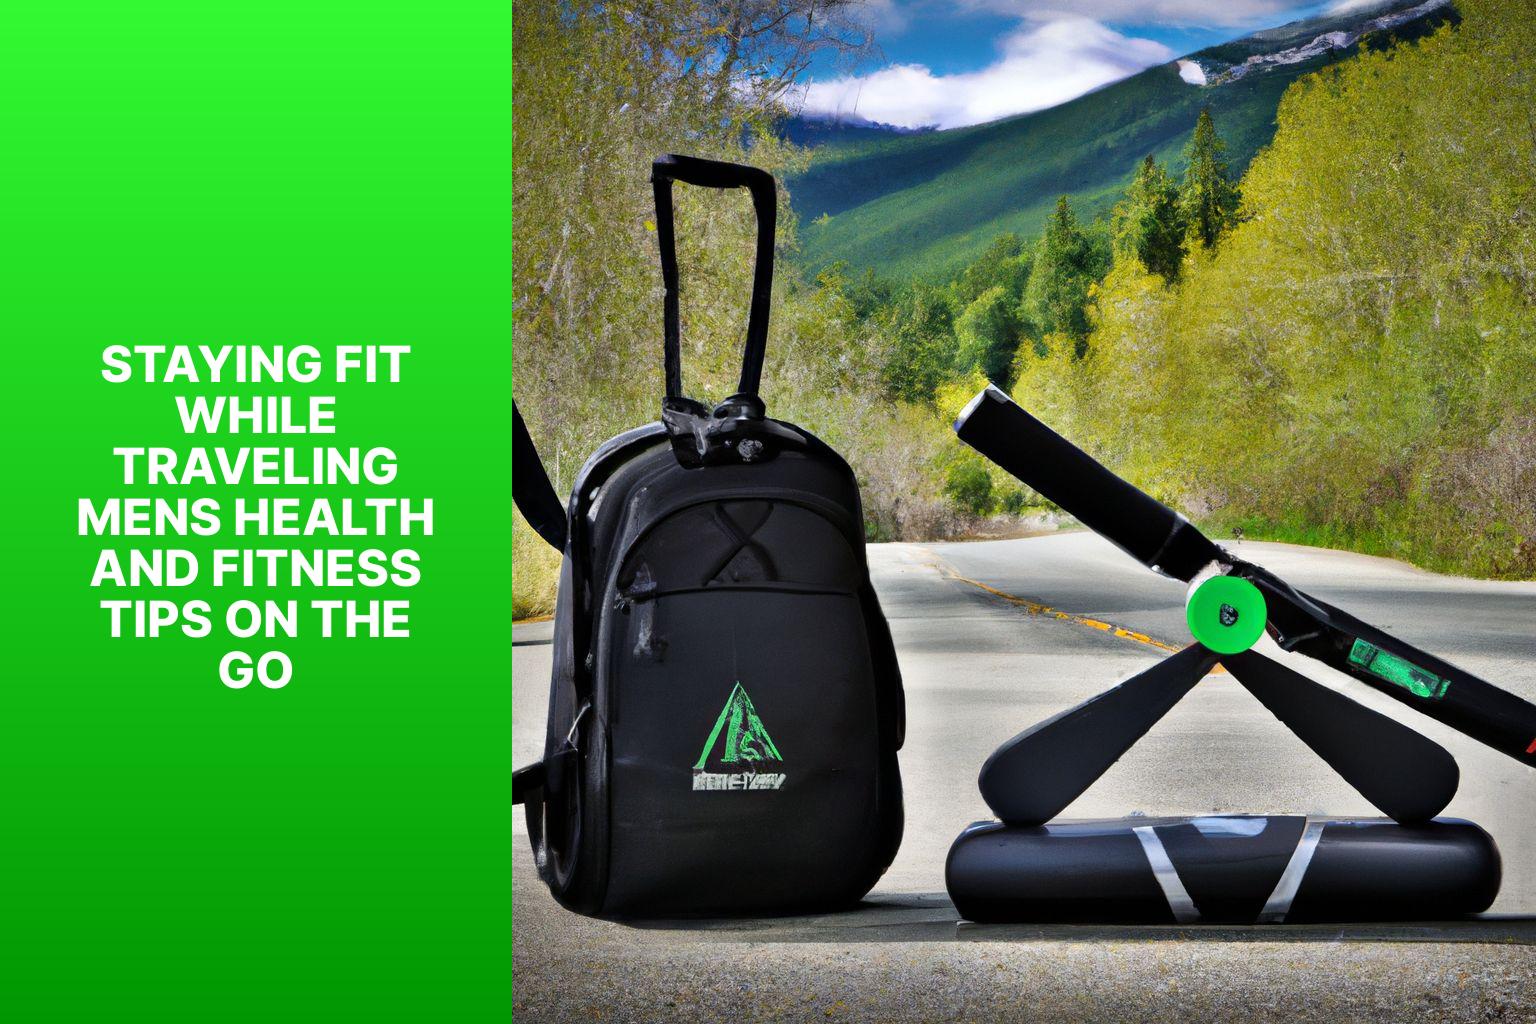 Staying Fit While Traveling: Men’s Health and Fitness Tips on the Go